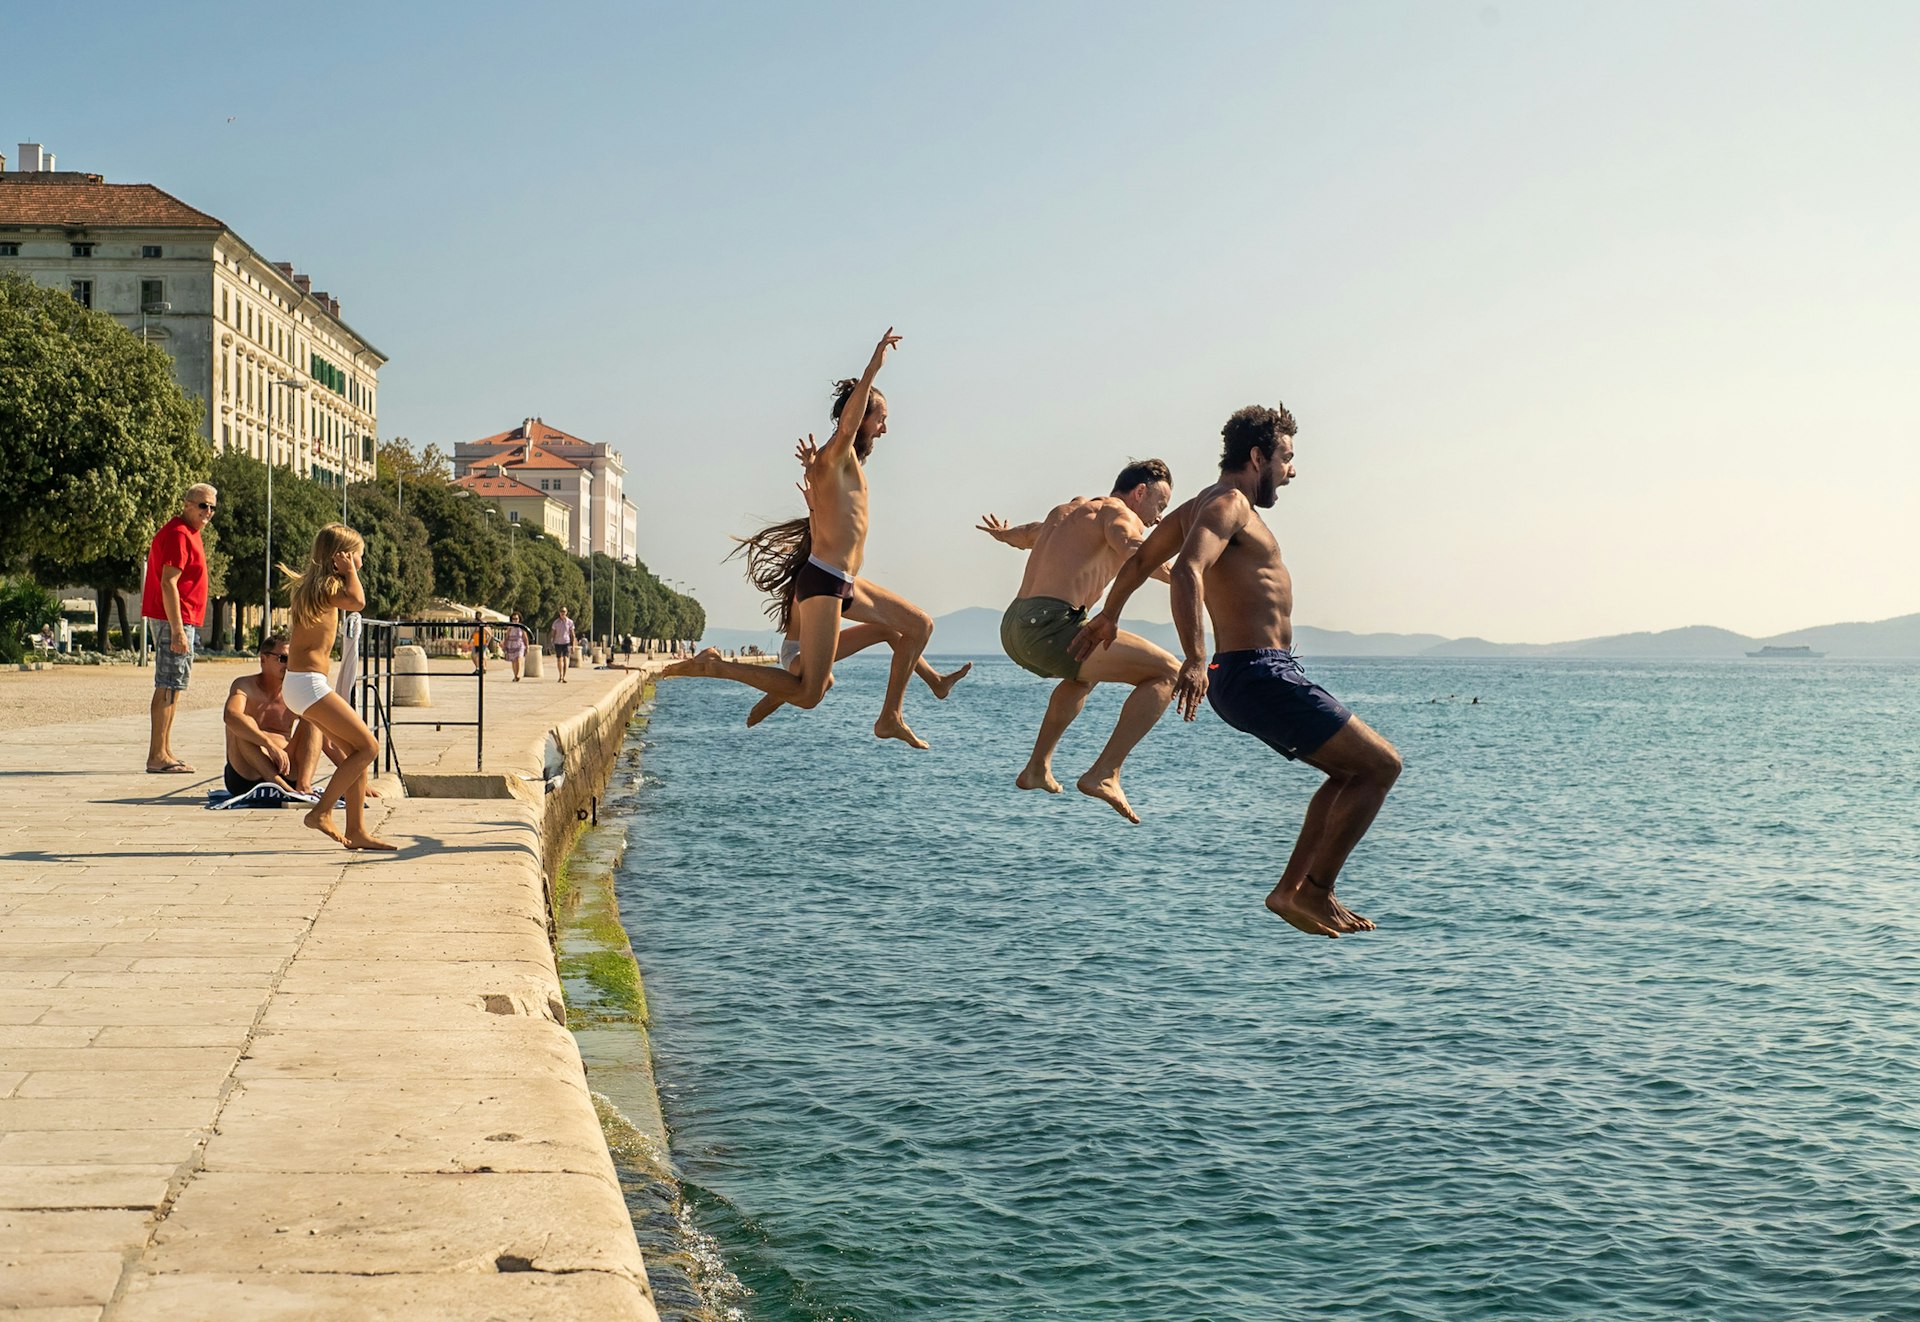 A group of people run off a walkway beside the sea and jump into the ocean